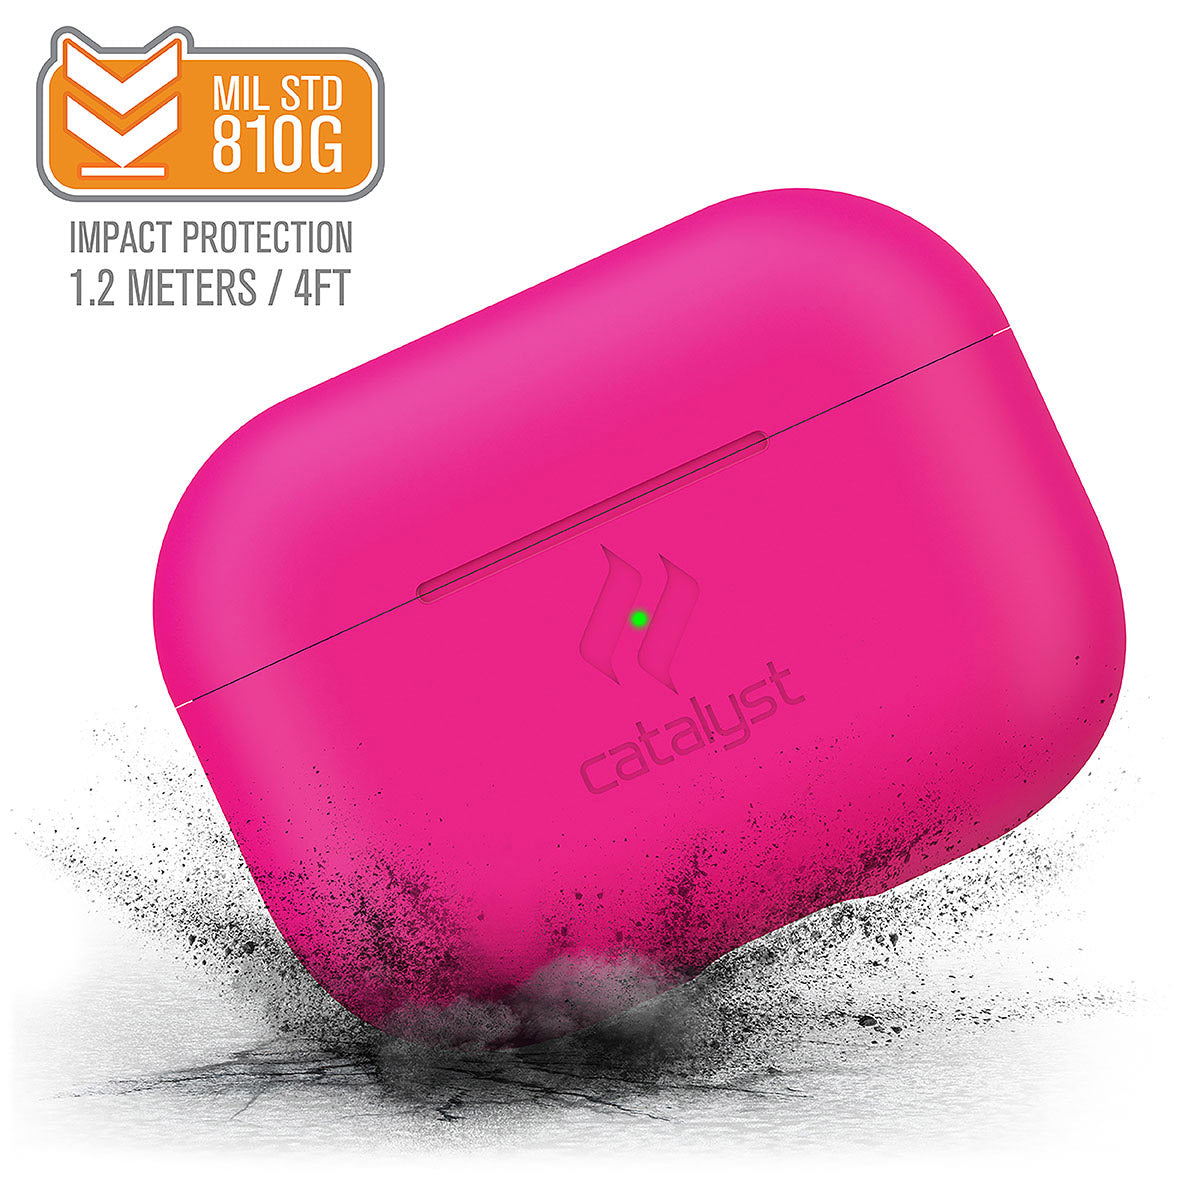 Catalyst airpods pro gen 2/1 slim case showing how drop proof the case is in a neon pink text reads MIL STD 810G impact protection 1.2 meters/4FT